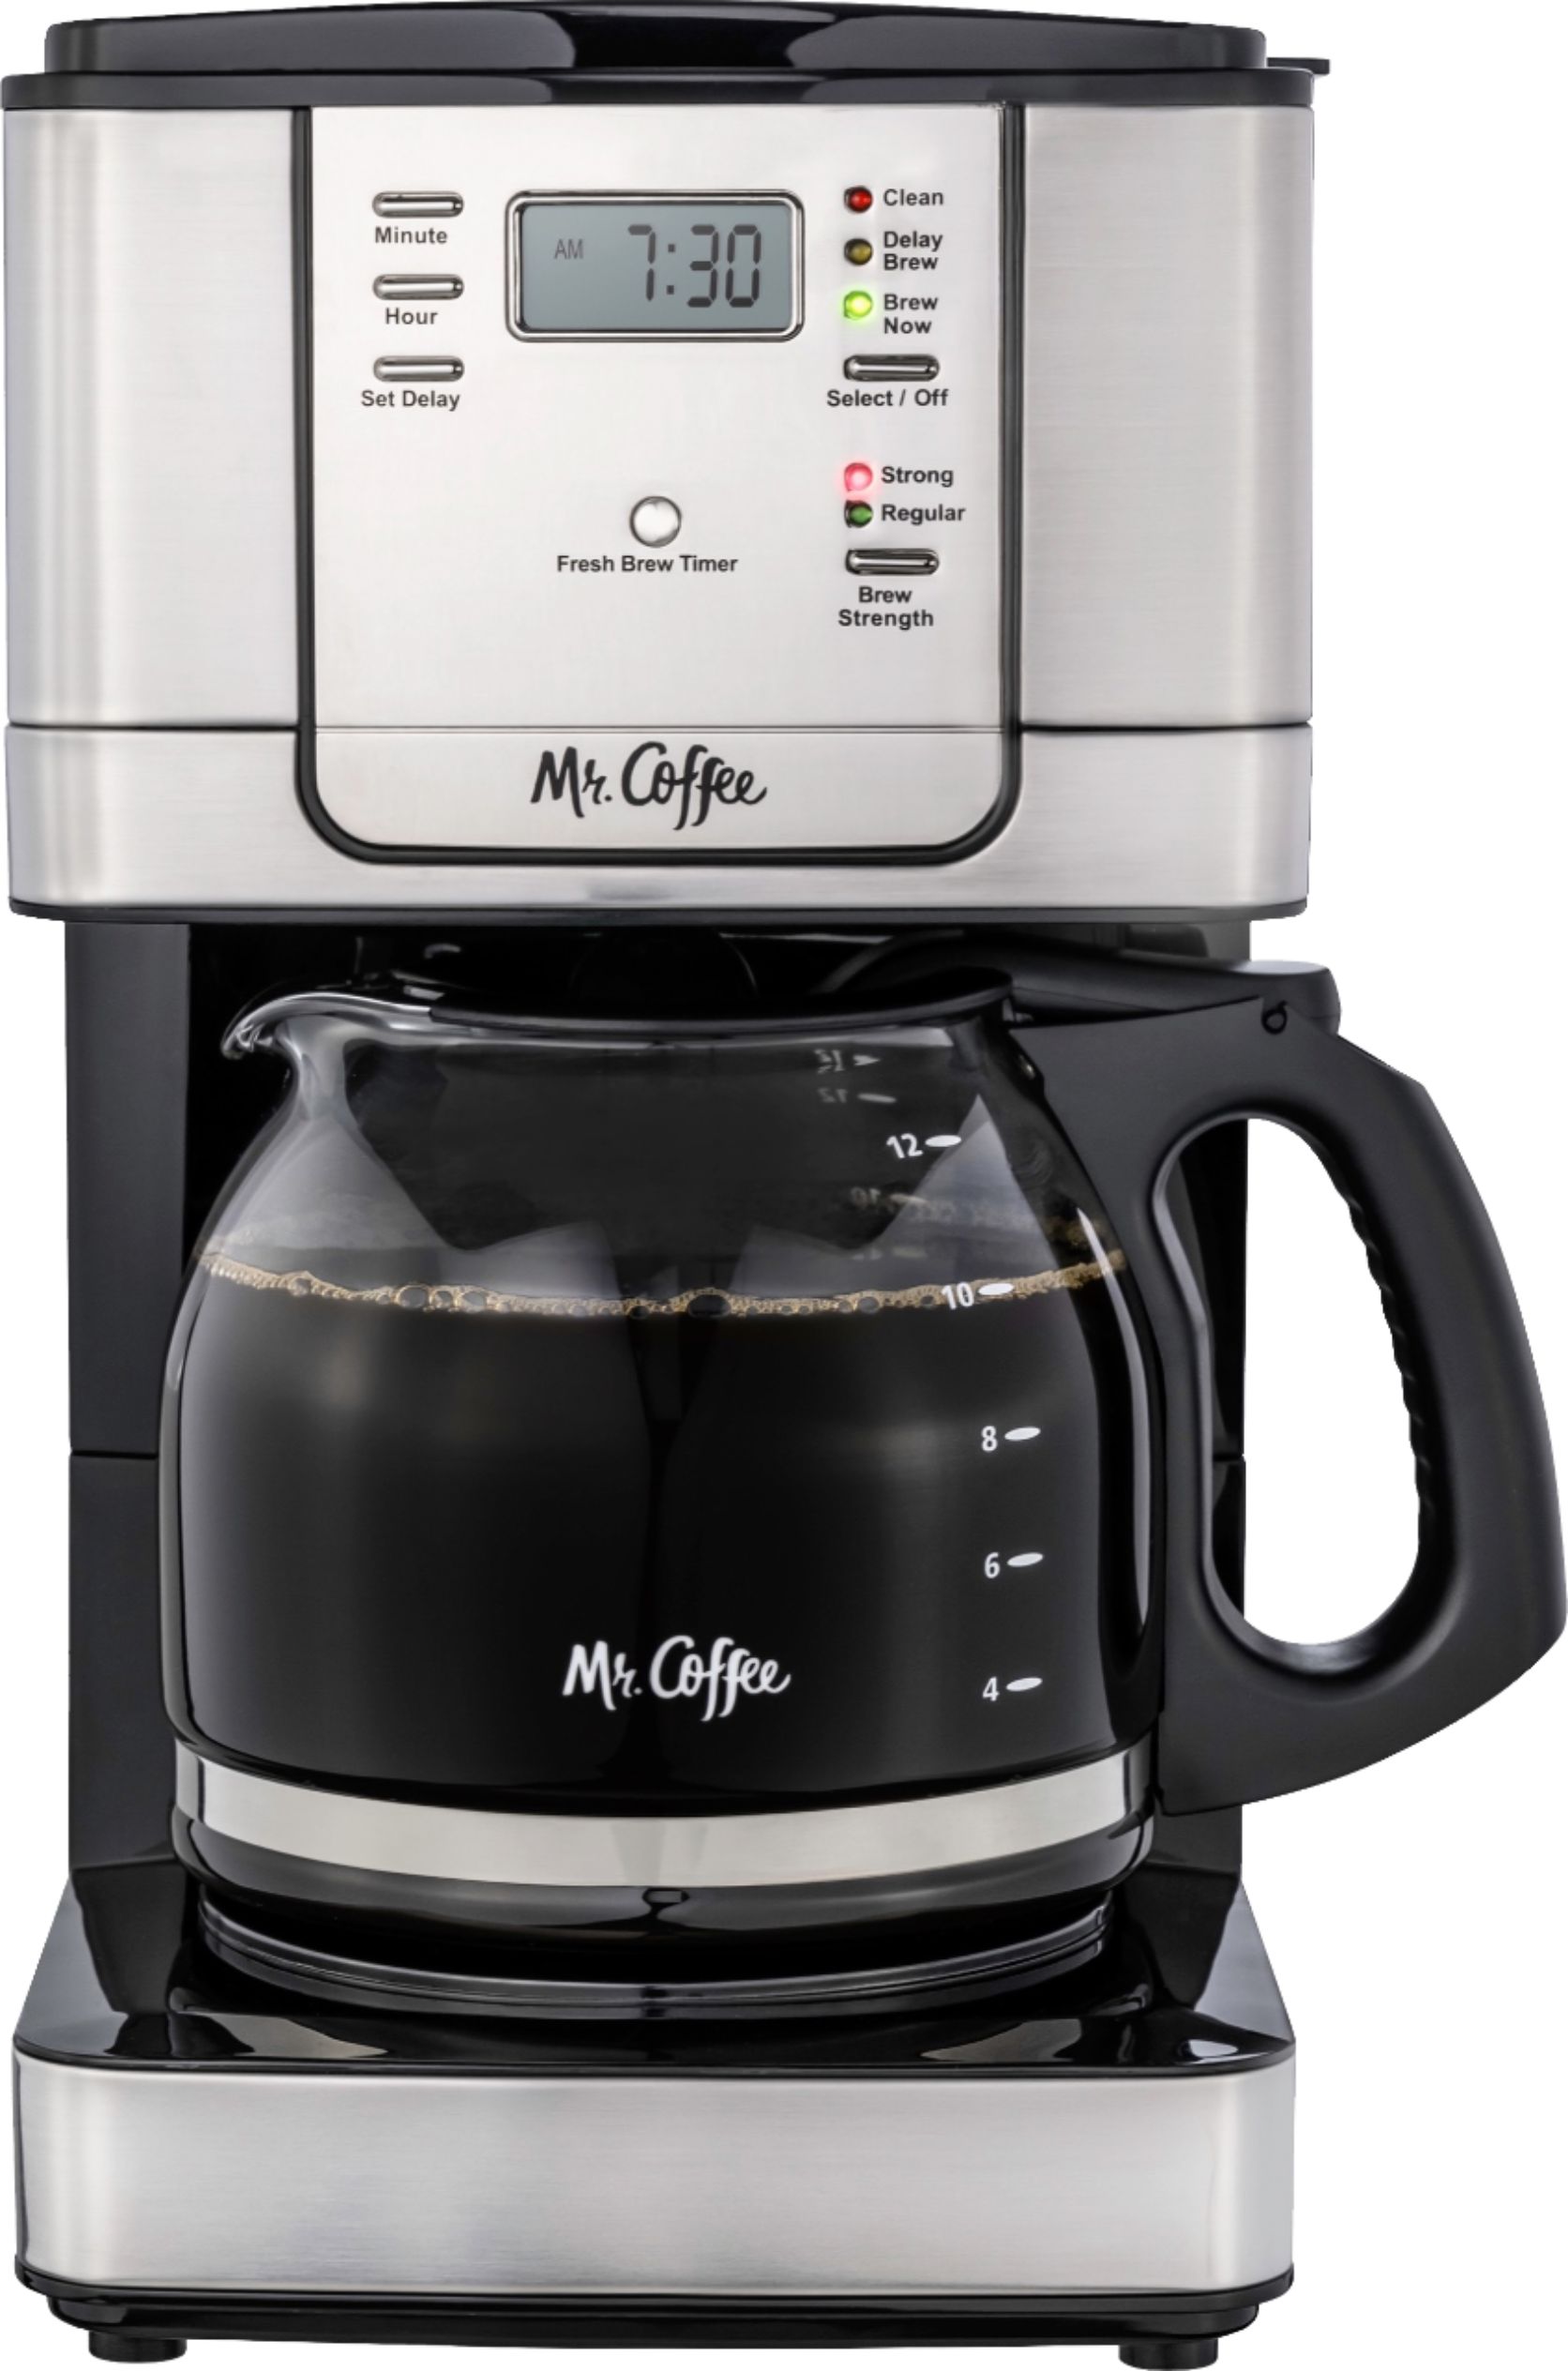 How to Clean Mr Coffee Maker? 